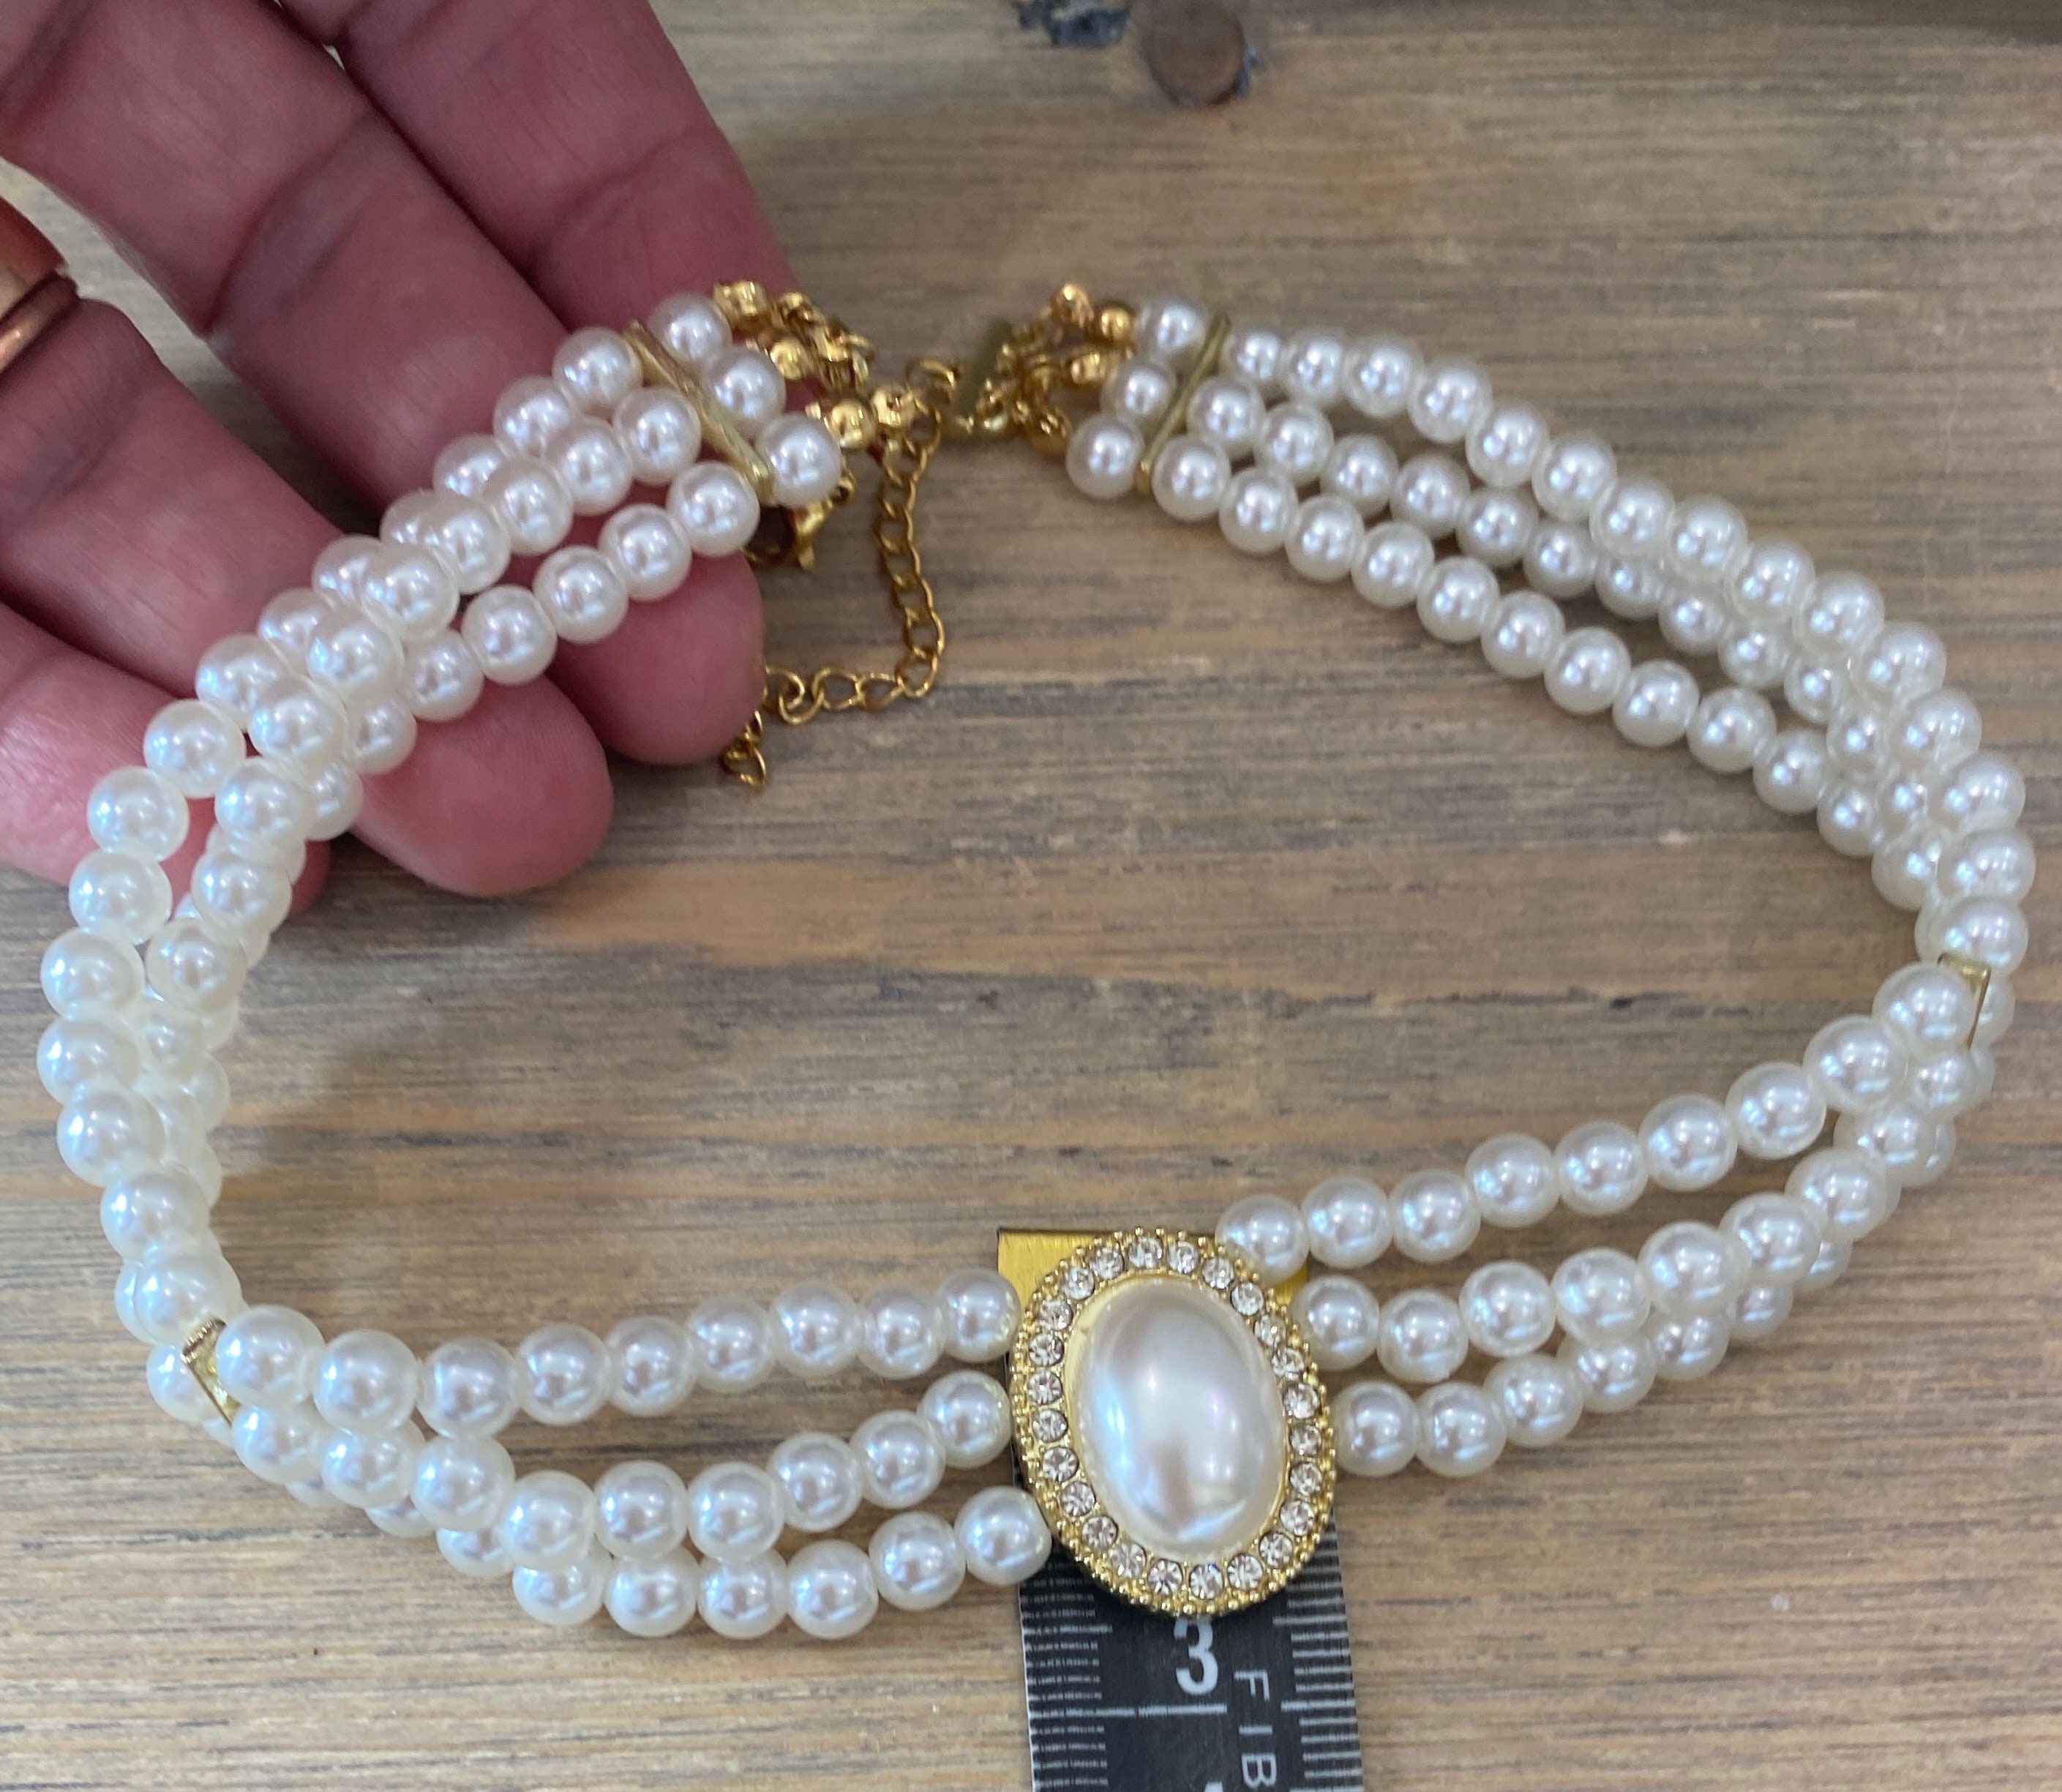  1920s Long Fake Pearls Necklace Layered Retro Vintage Imitation  Round for Women Girls Flapper Party Wedding Mother's Day Gift-5 Layered:  Clothing, Shoes & Jewelry